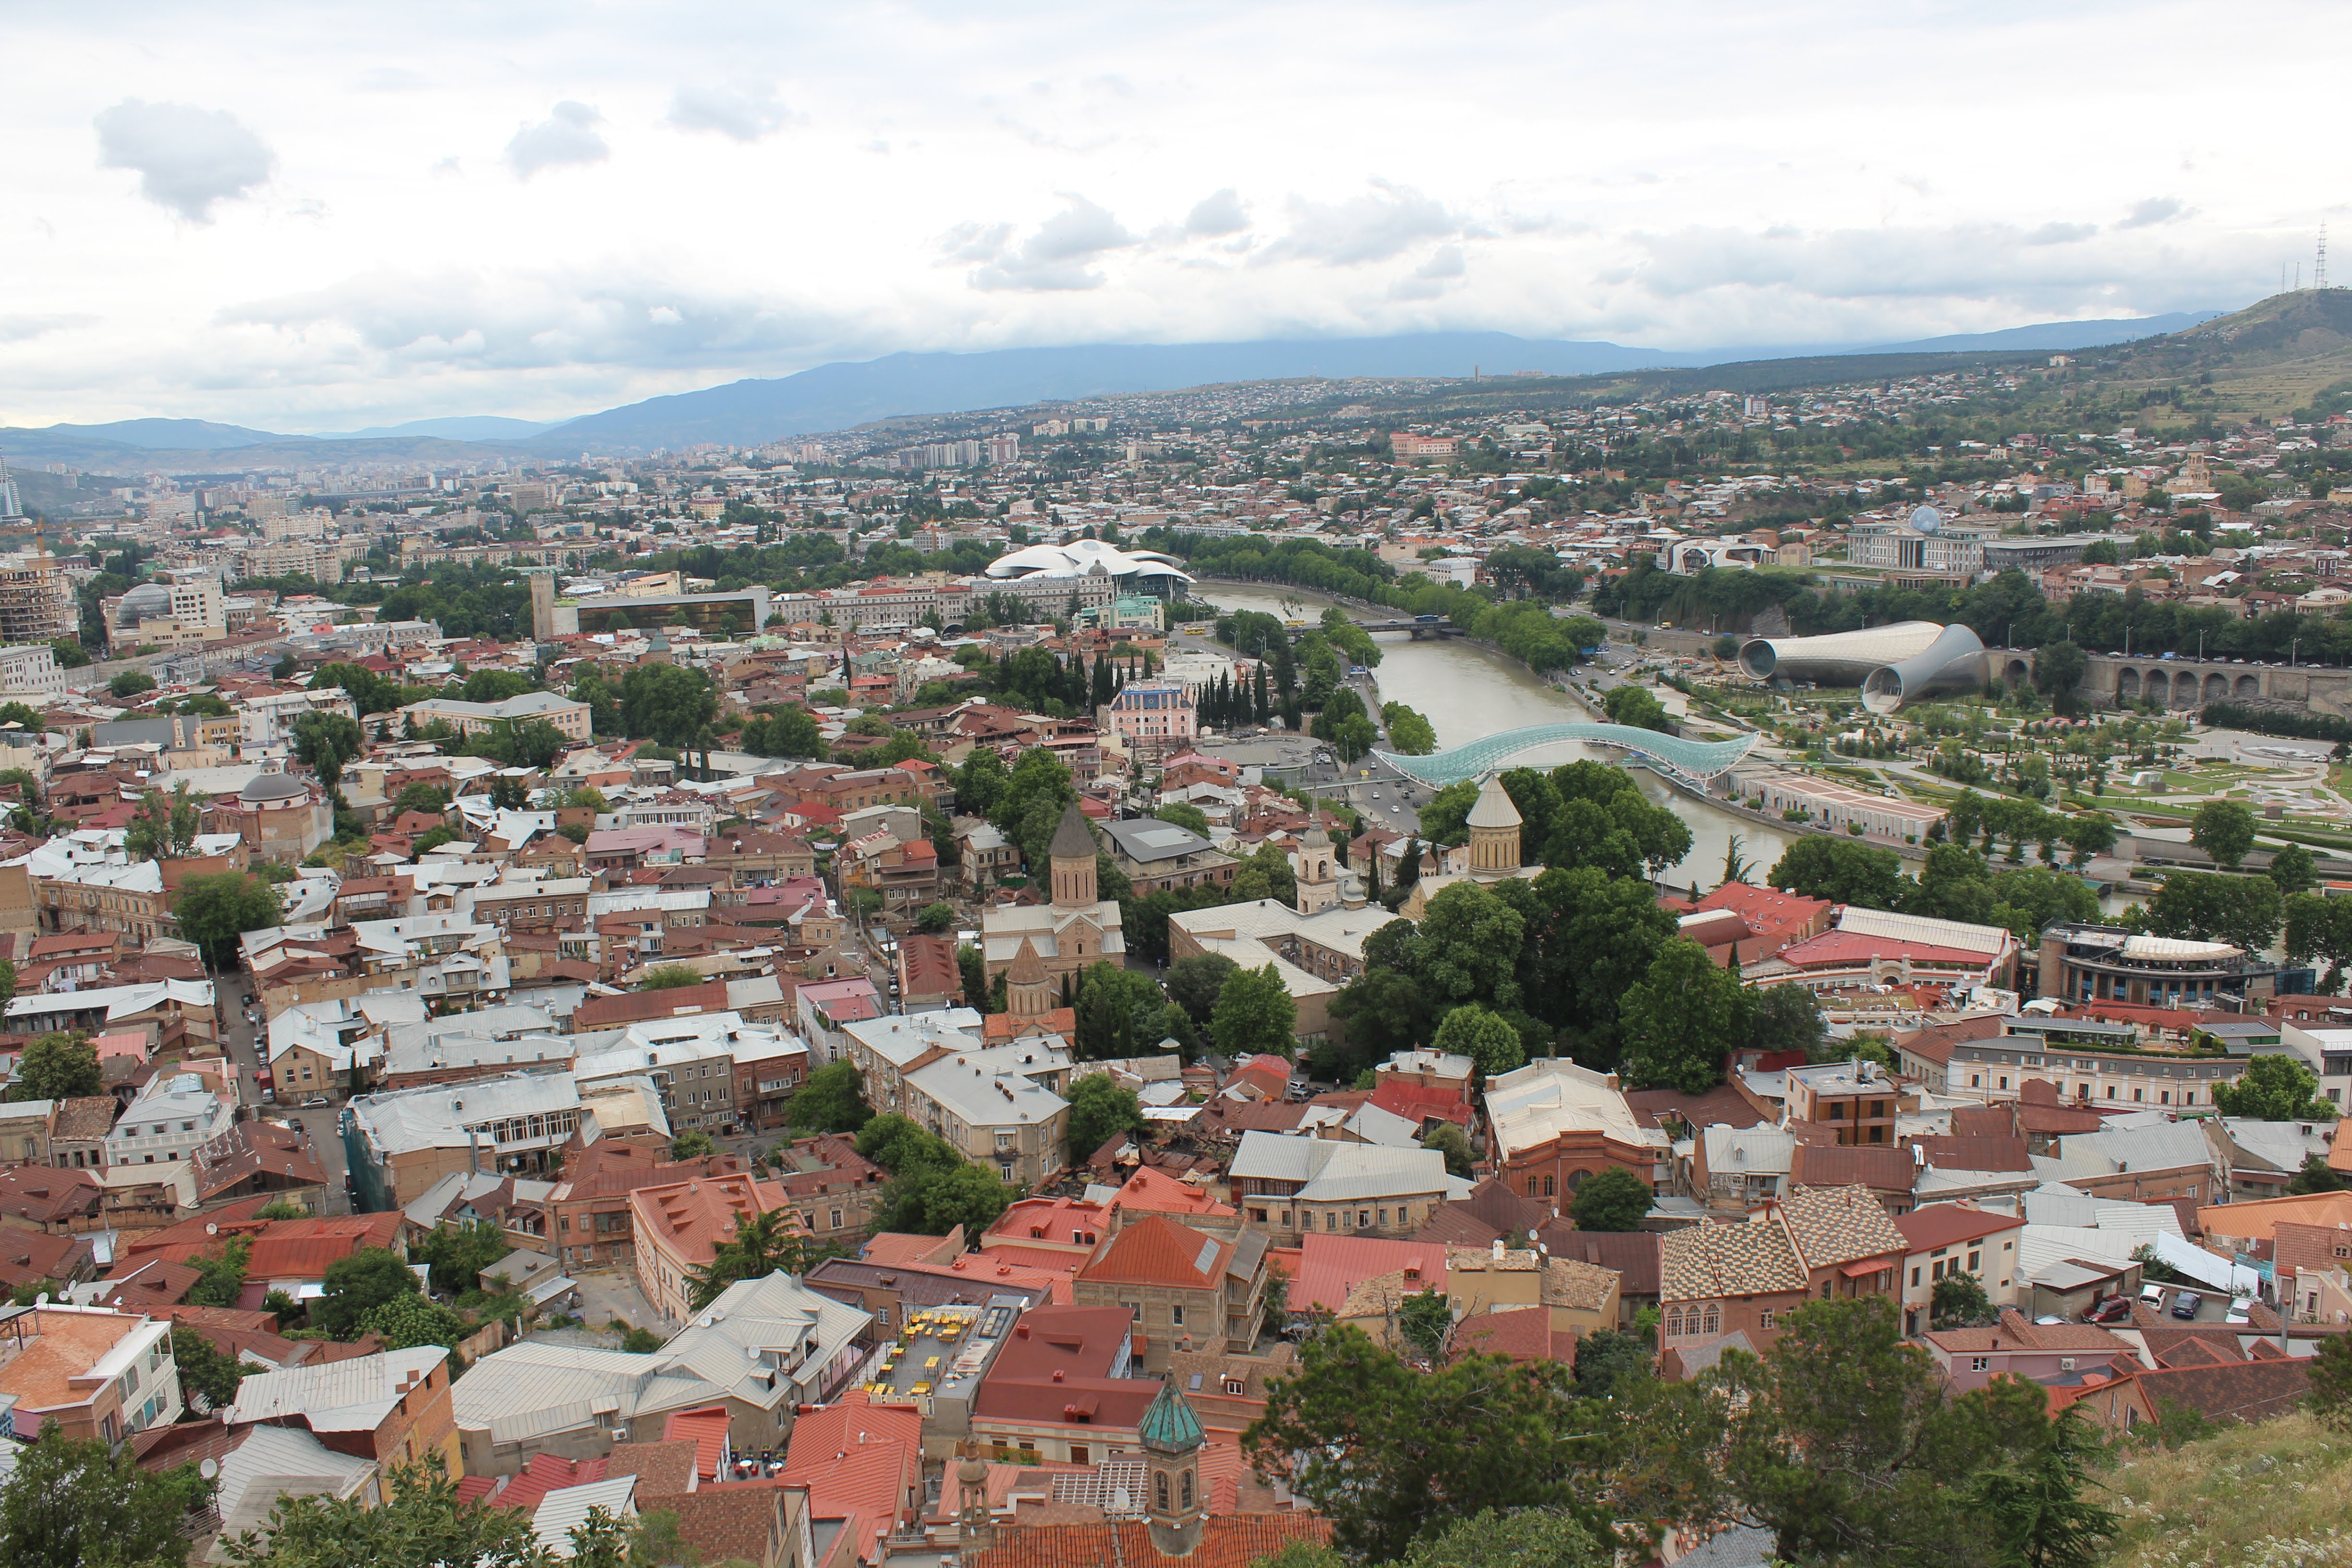 View from the top of Narikala Fortress